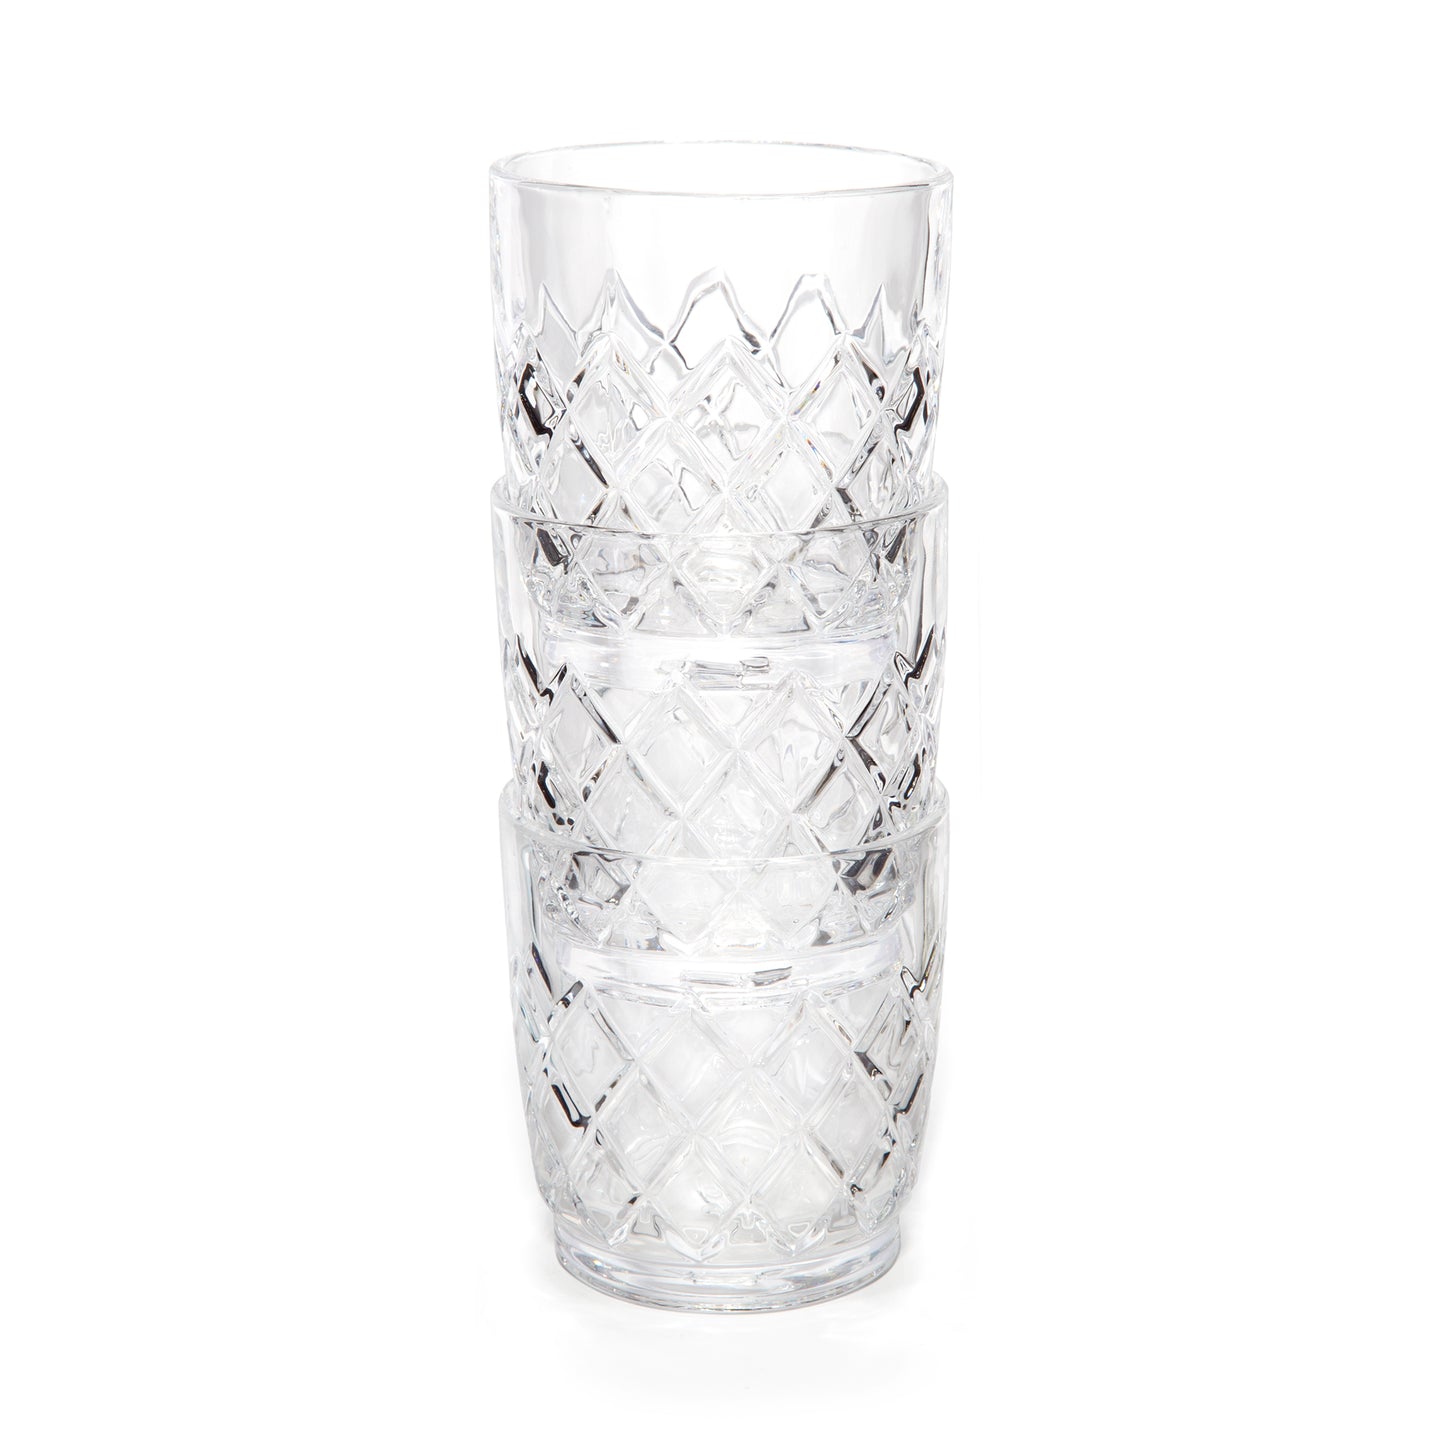 YARAI® STACKABLE DOUBLE ROCKS GLASS – 10oz (295ml) / STACKABLE / CASE OF 24